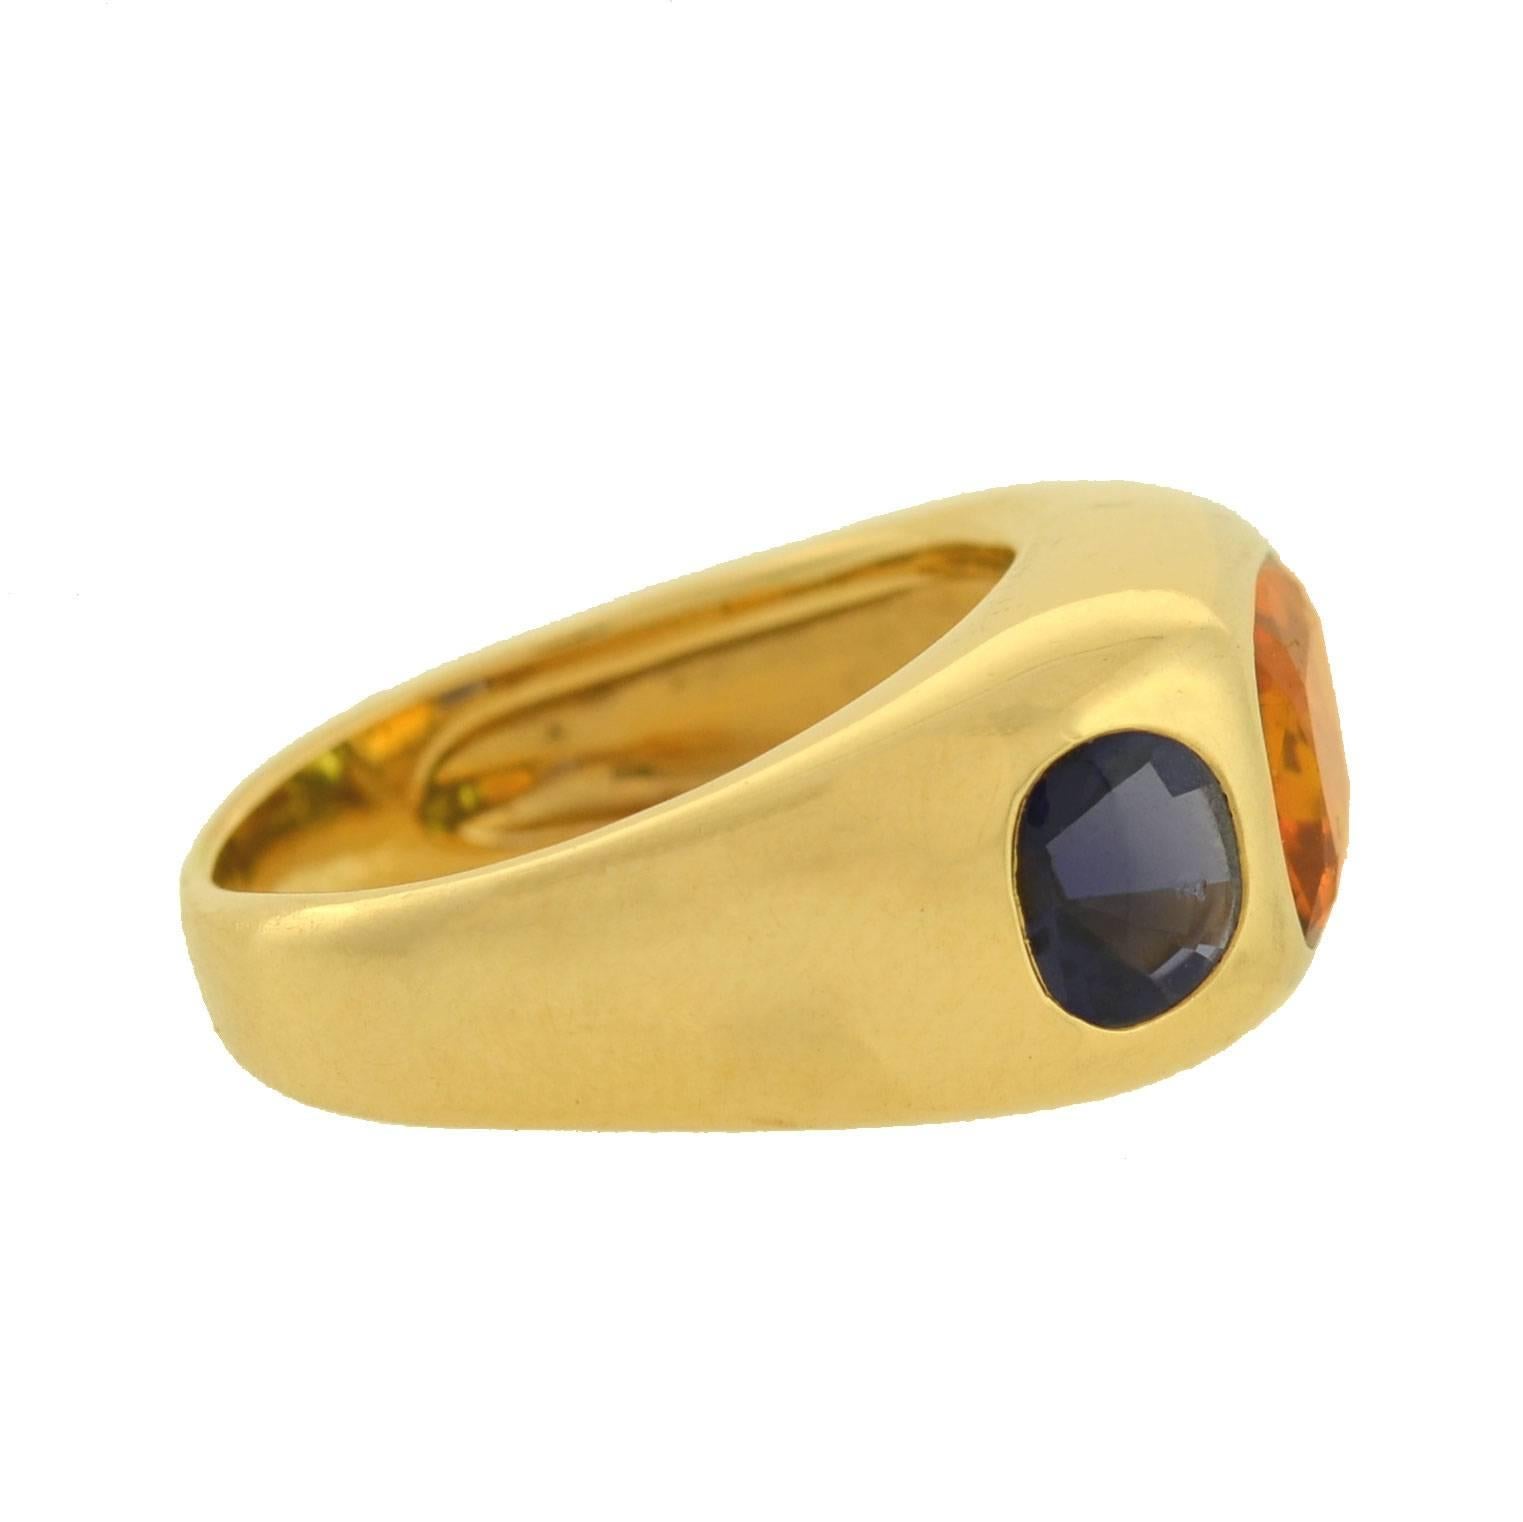 A fabulous 3-stone ring by legendary fashion house Chanel! This stunning and unusual ring is crafted in 18kt yellow gold and adorns three vibrant gemstones: a citrine in the center, and a peridot and iolite on the sides. The citrine is larger than